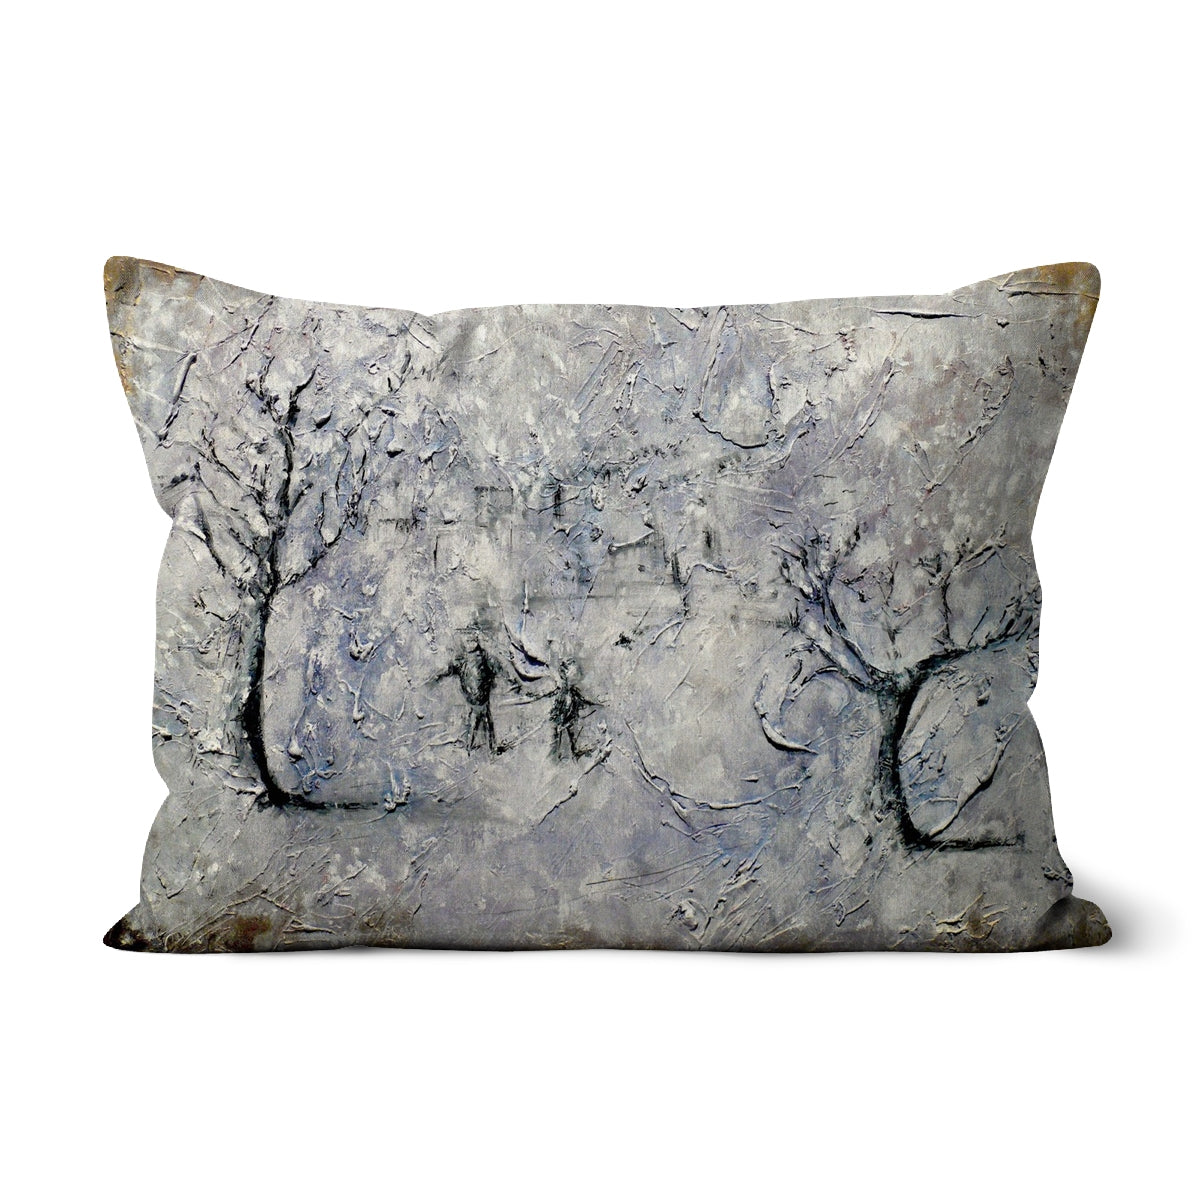 Father Daughter Snow Art Gifts Cushion-Cushions-Abstract & Impressionistic Art Gallery-Linen-19"x13"-Paintings, Prints, Homeware, Art Gifts From Scotland By Scottish Artist Kevin Hunter